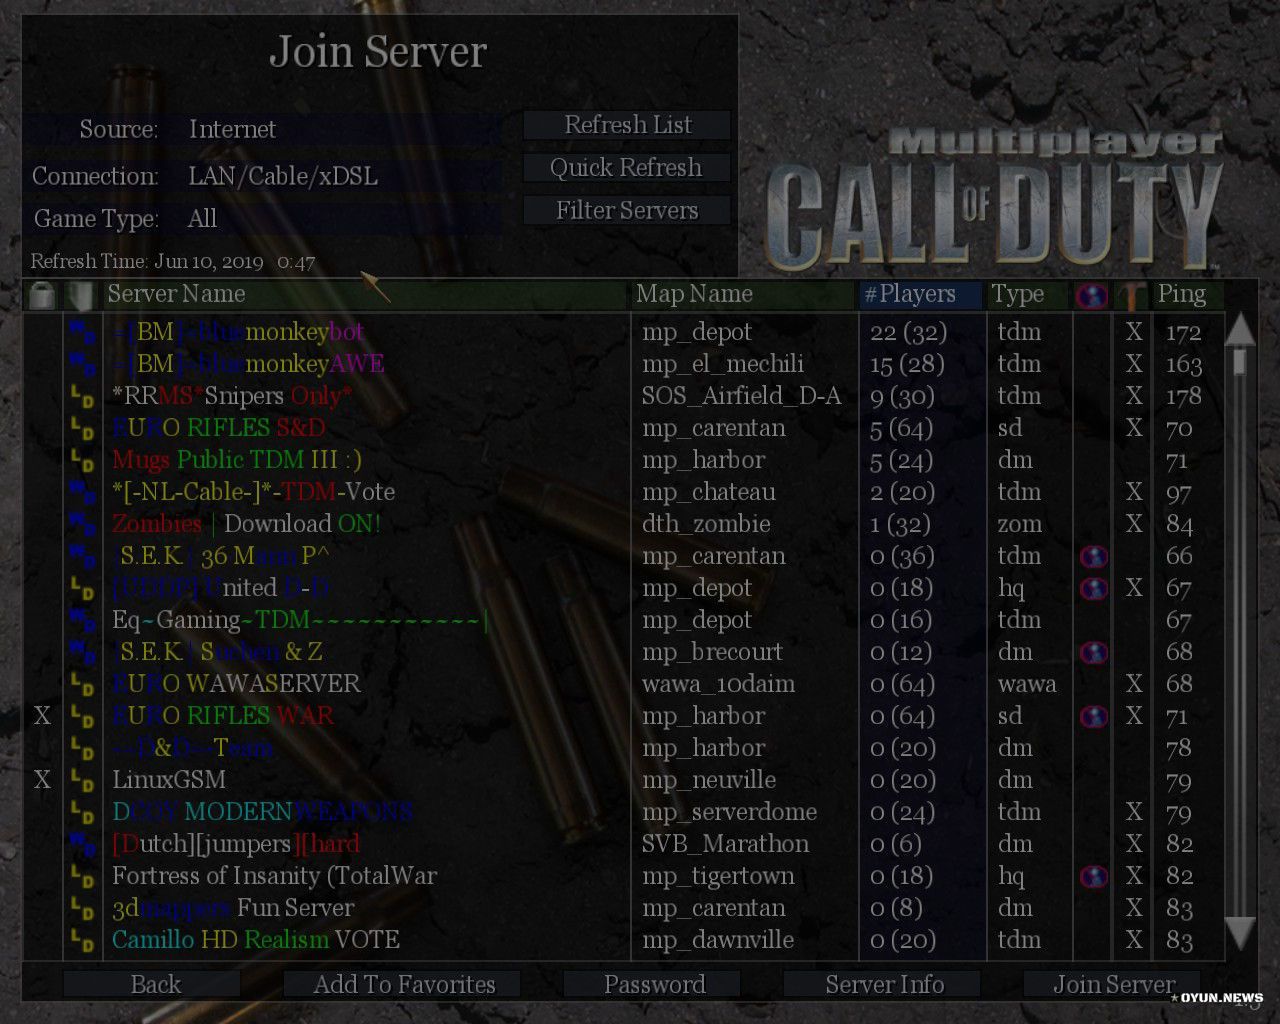 call of duty united offensive multiplayer cd key generator